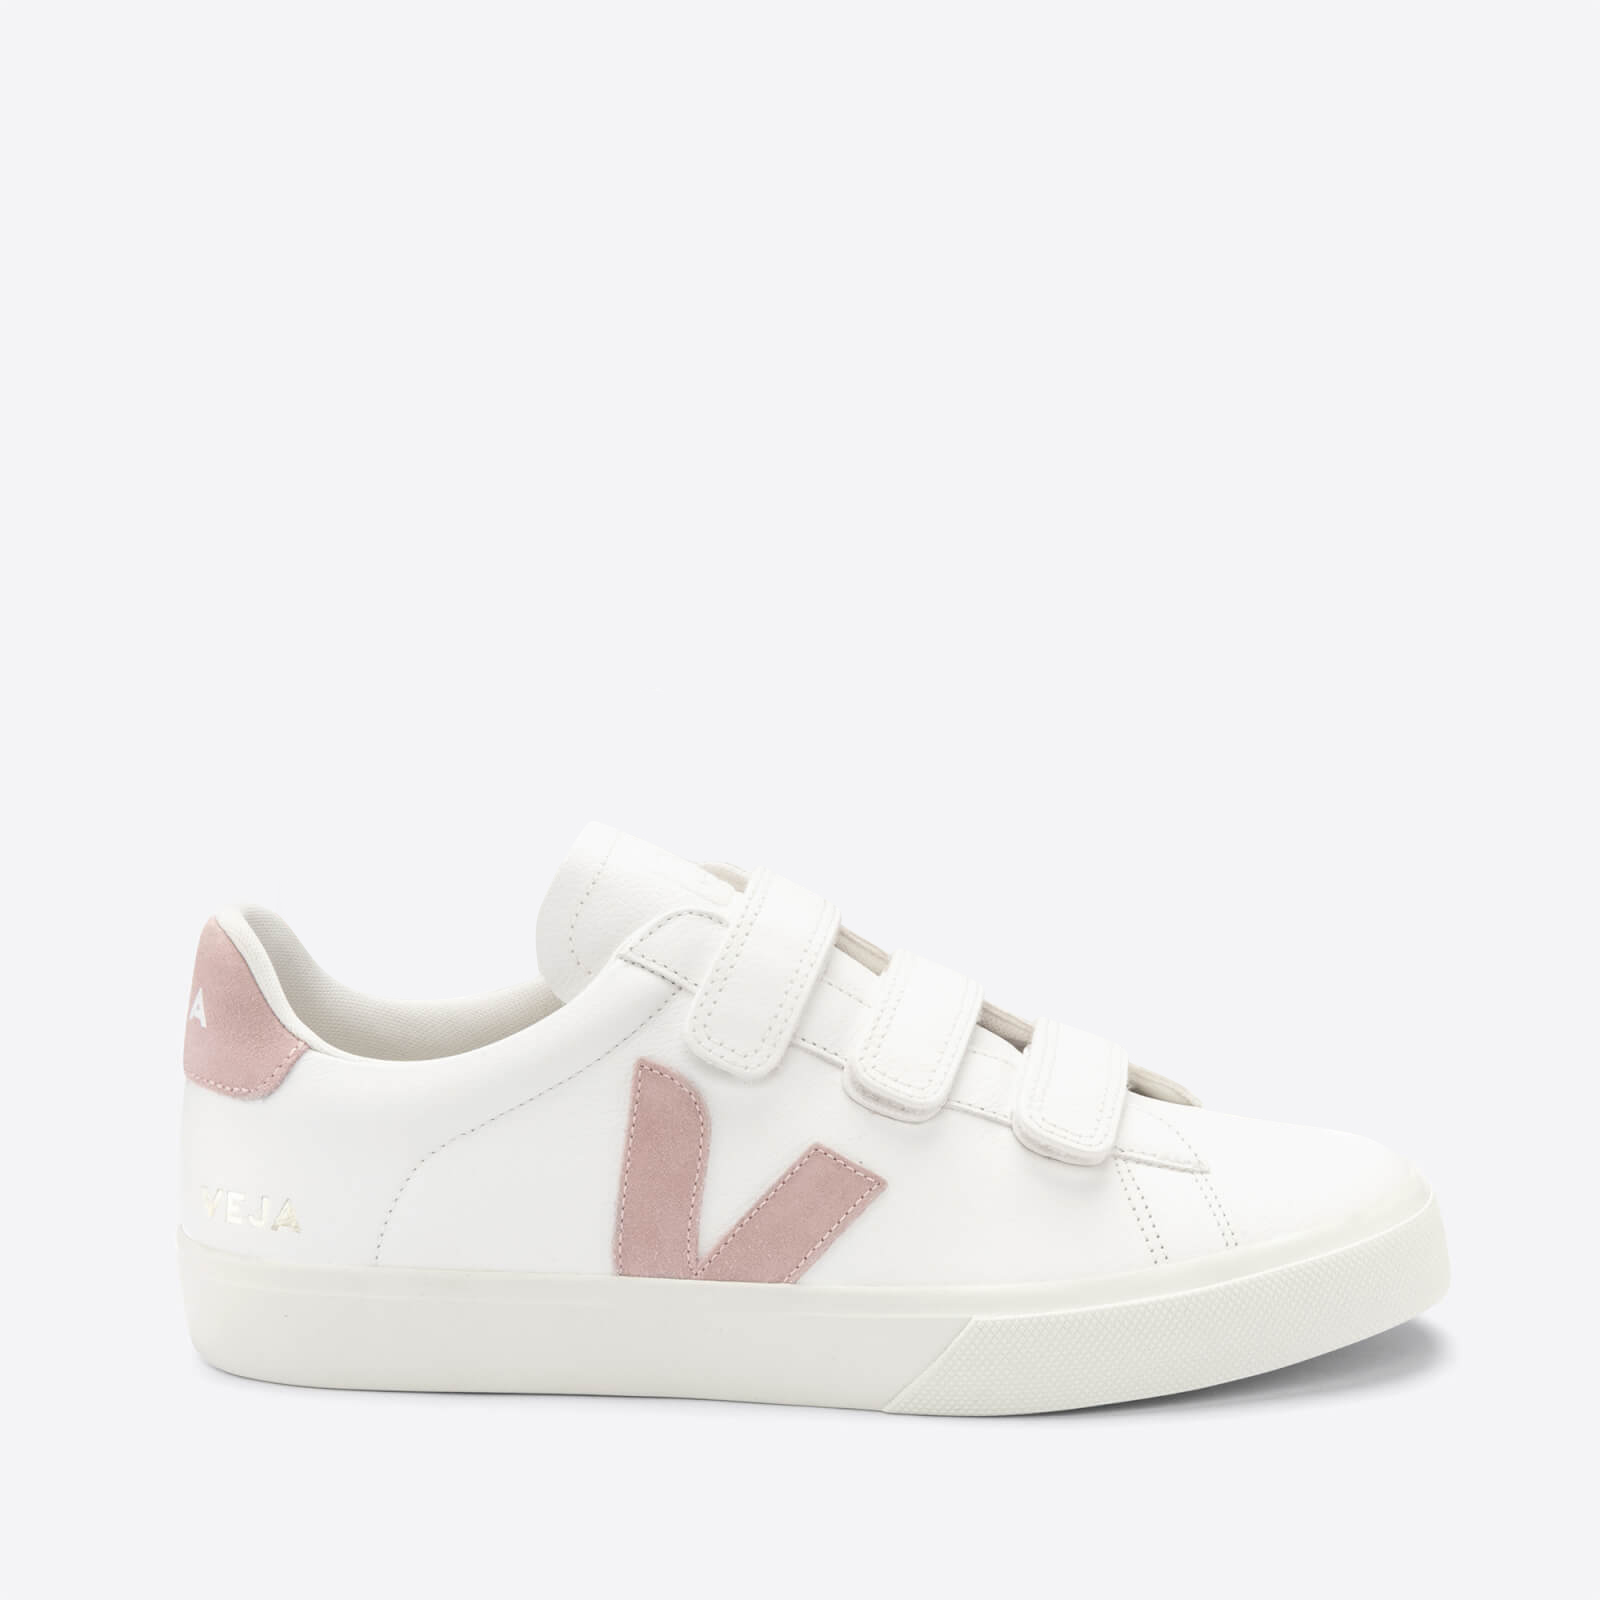 Veja Recife Chrome-Free Leather Trainers - UK 3 | Allsole